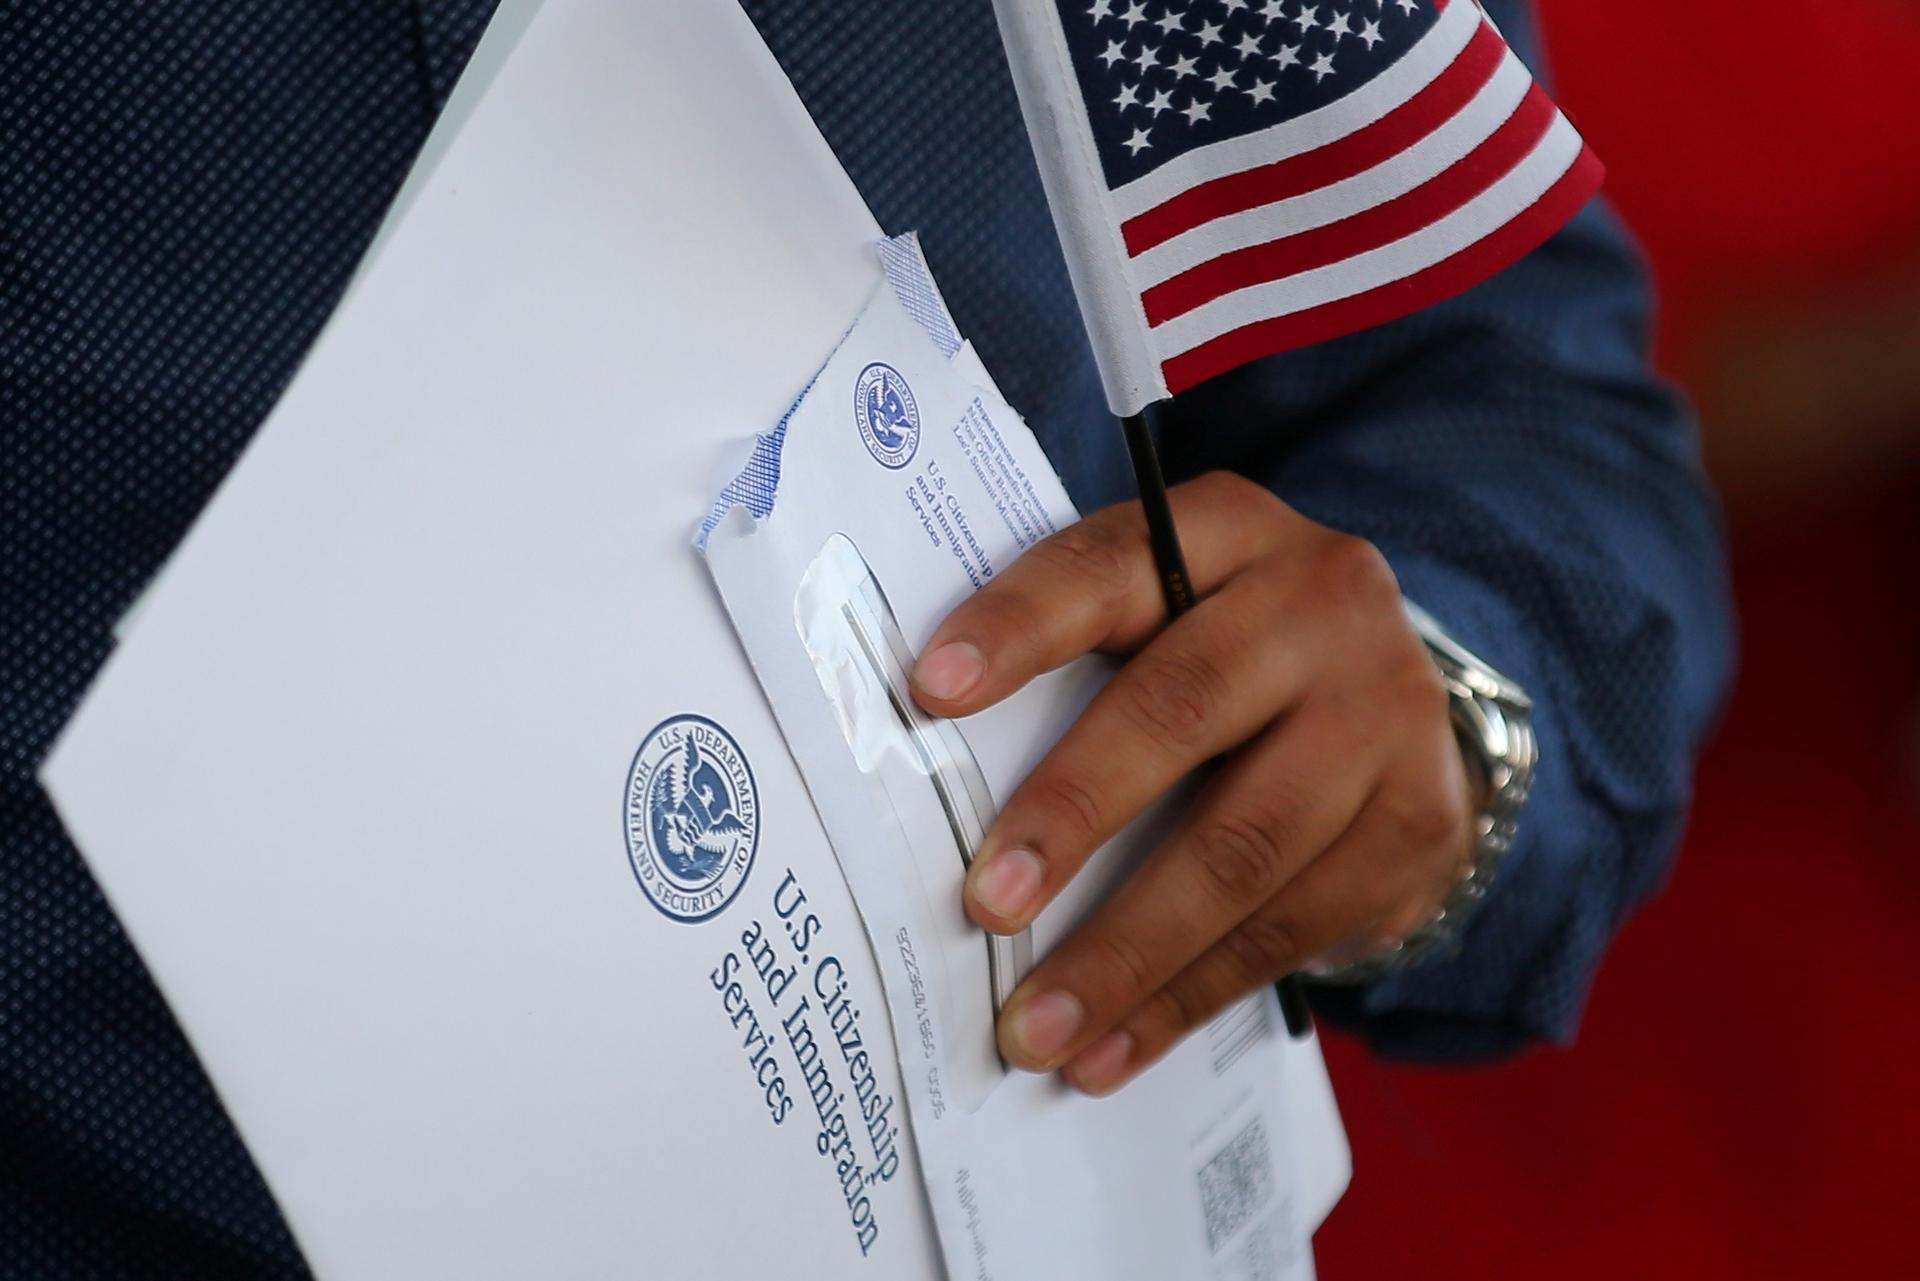 Close-up photo of man's hand, holding US flag, papers and envelope with U.S. Citizenship and Immigration Services logo